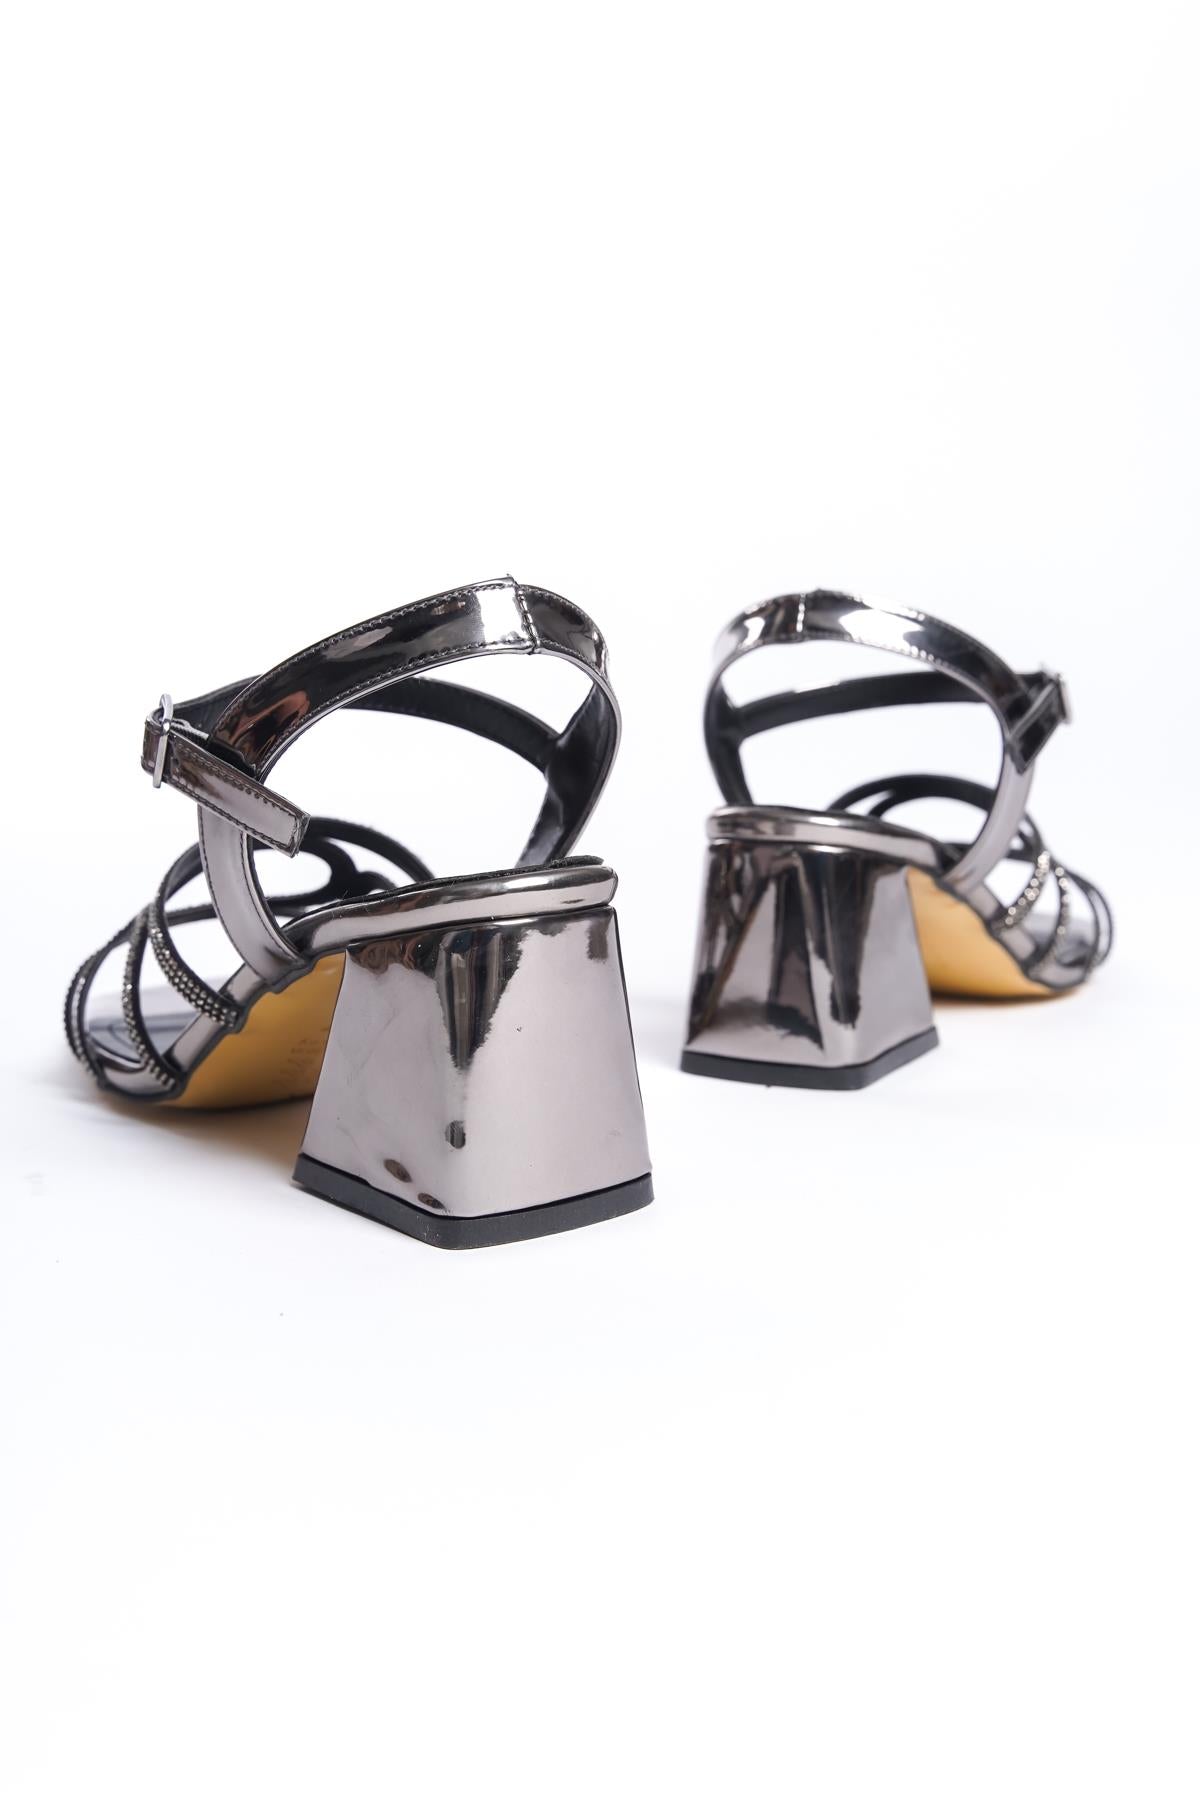 Women's Patent Leather Platinum Low Thick Heel Stone Sandals 5 cm - STREETMODE™